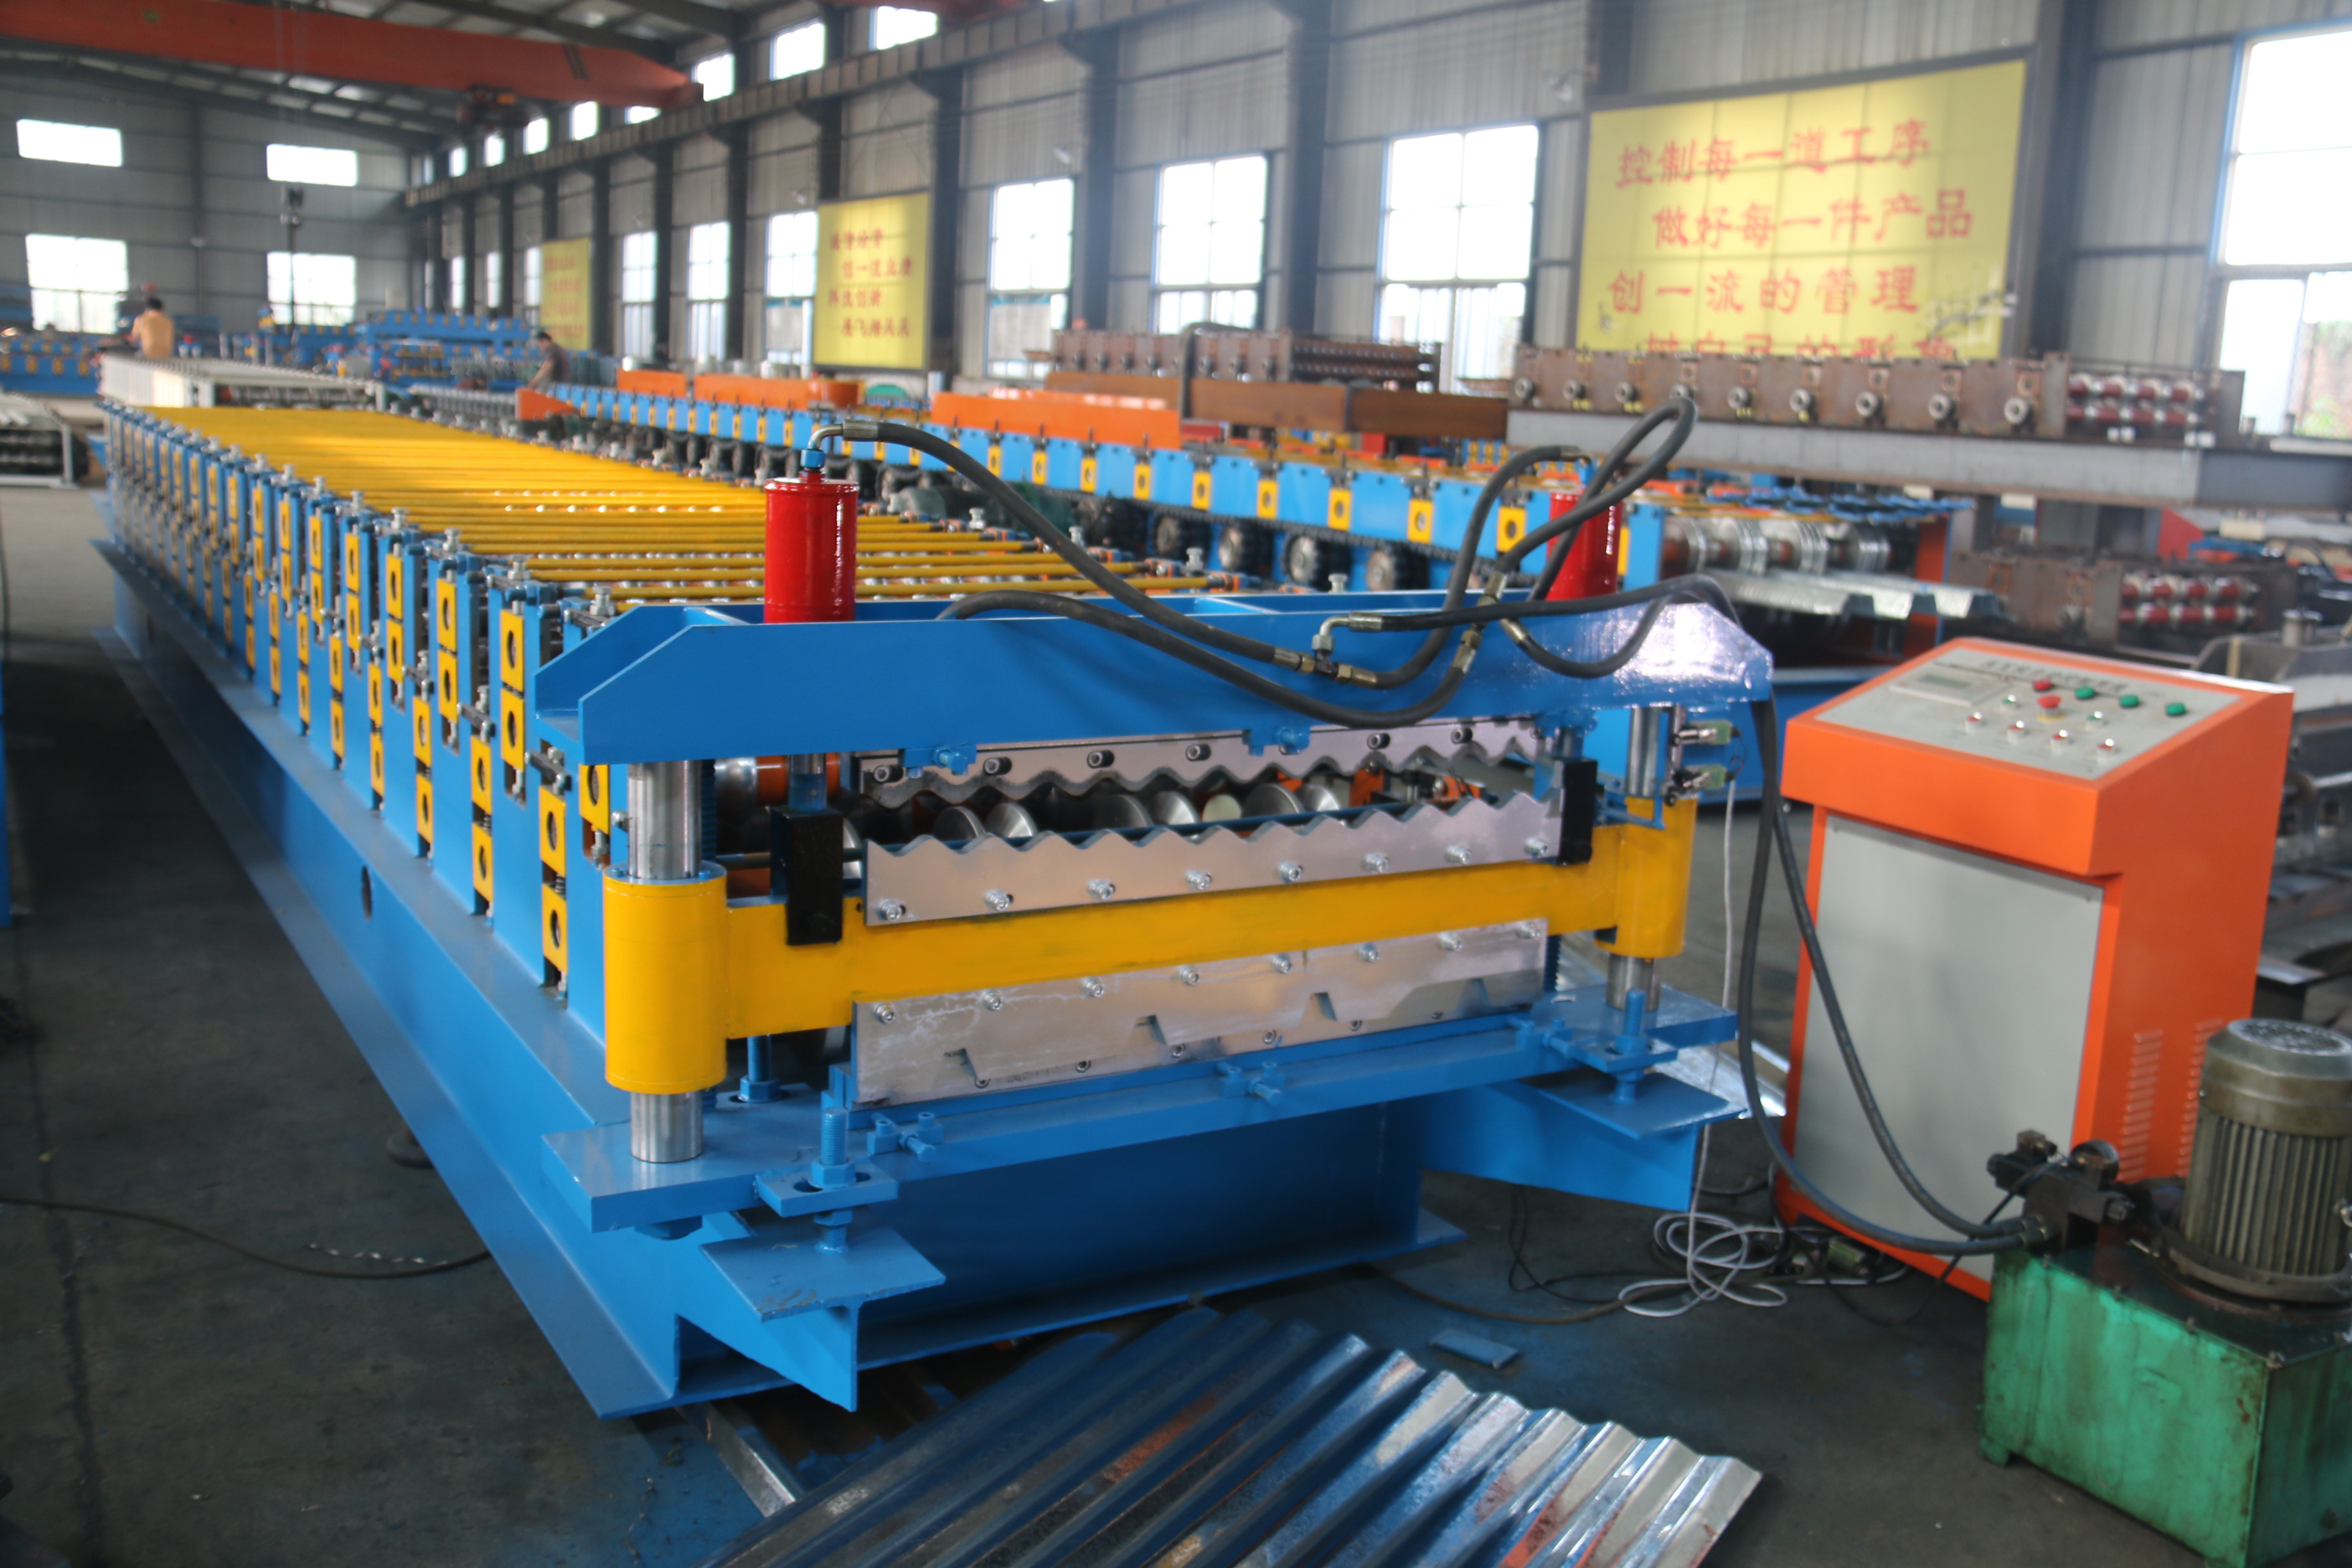 Roll equipments double layer roof and wall panel forming machine